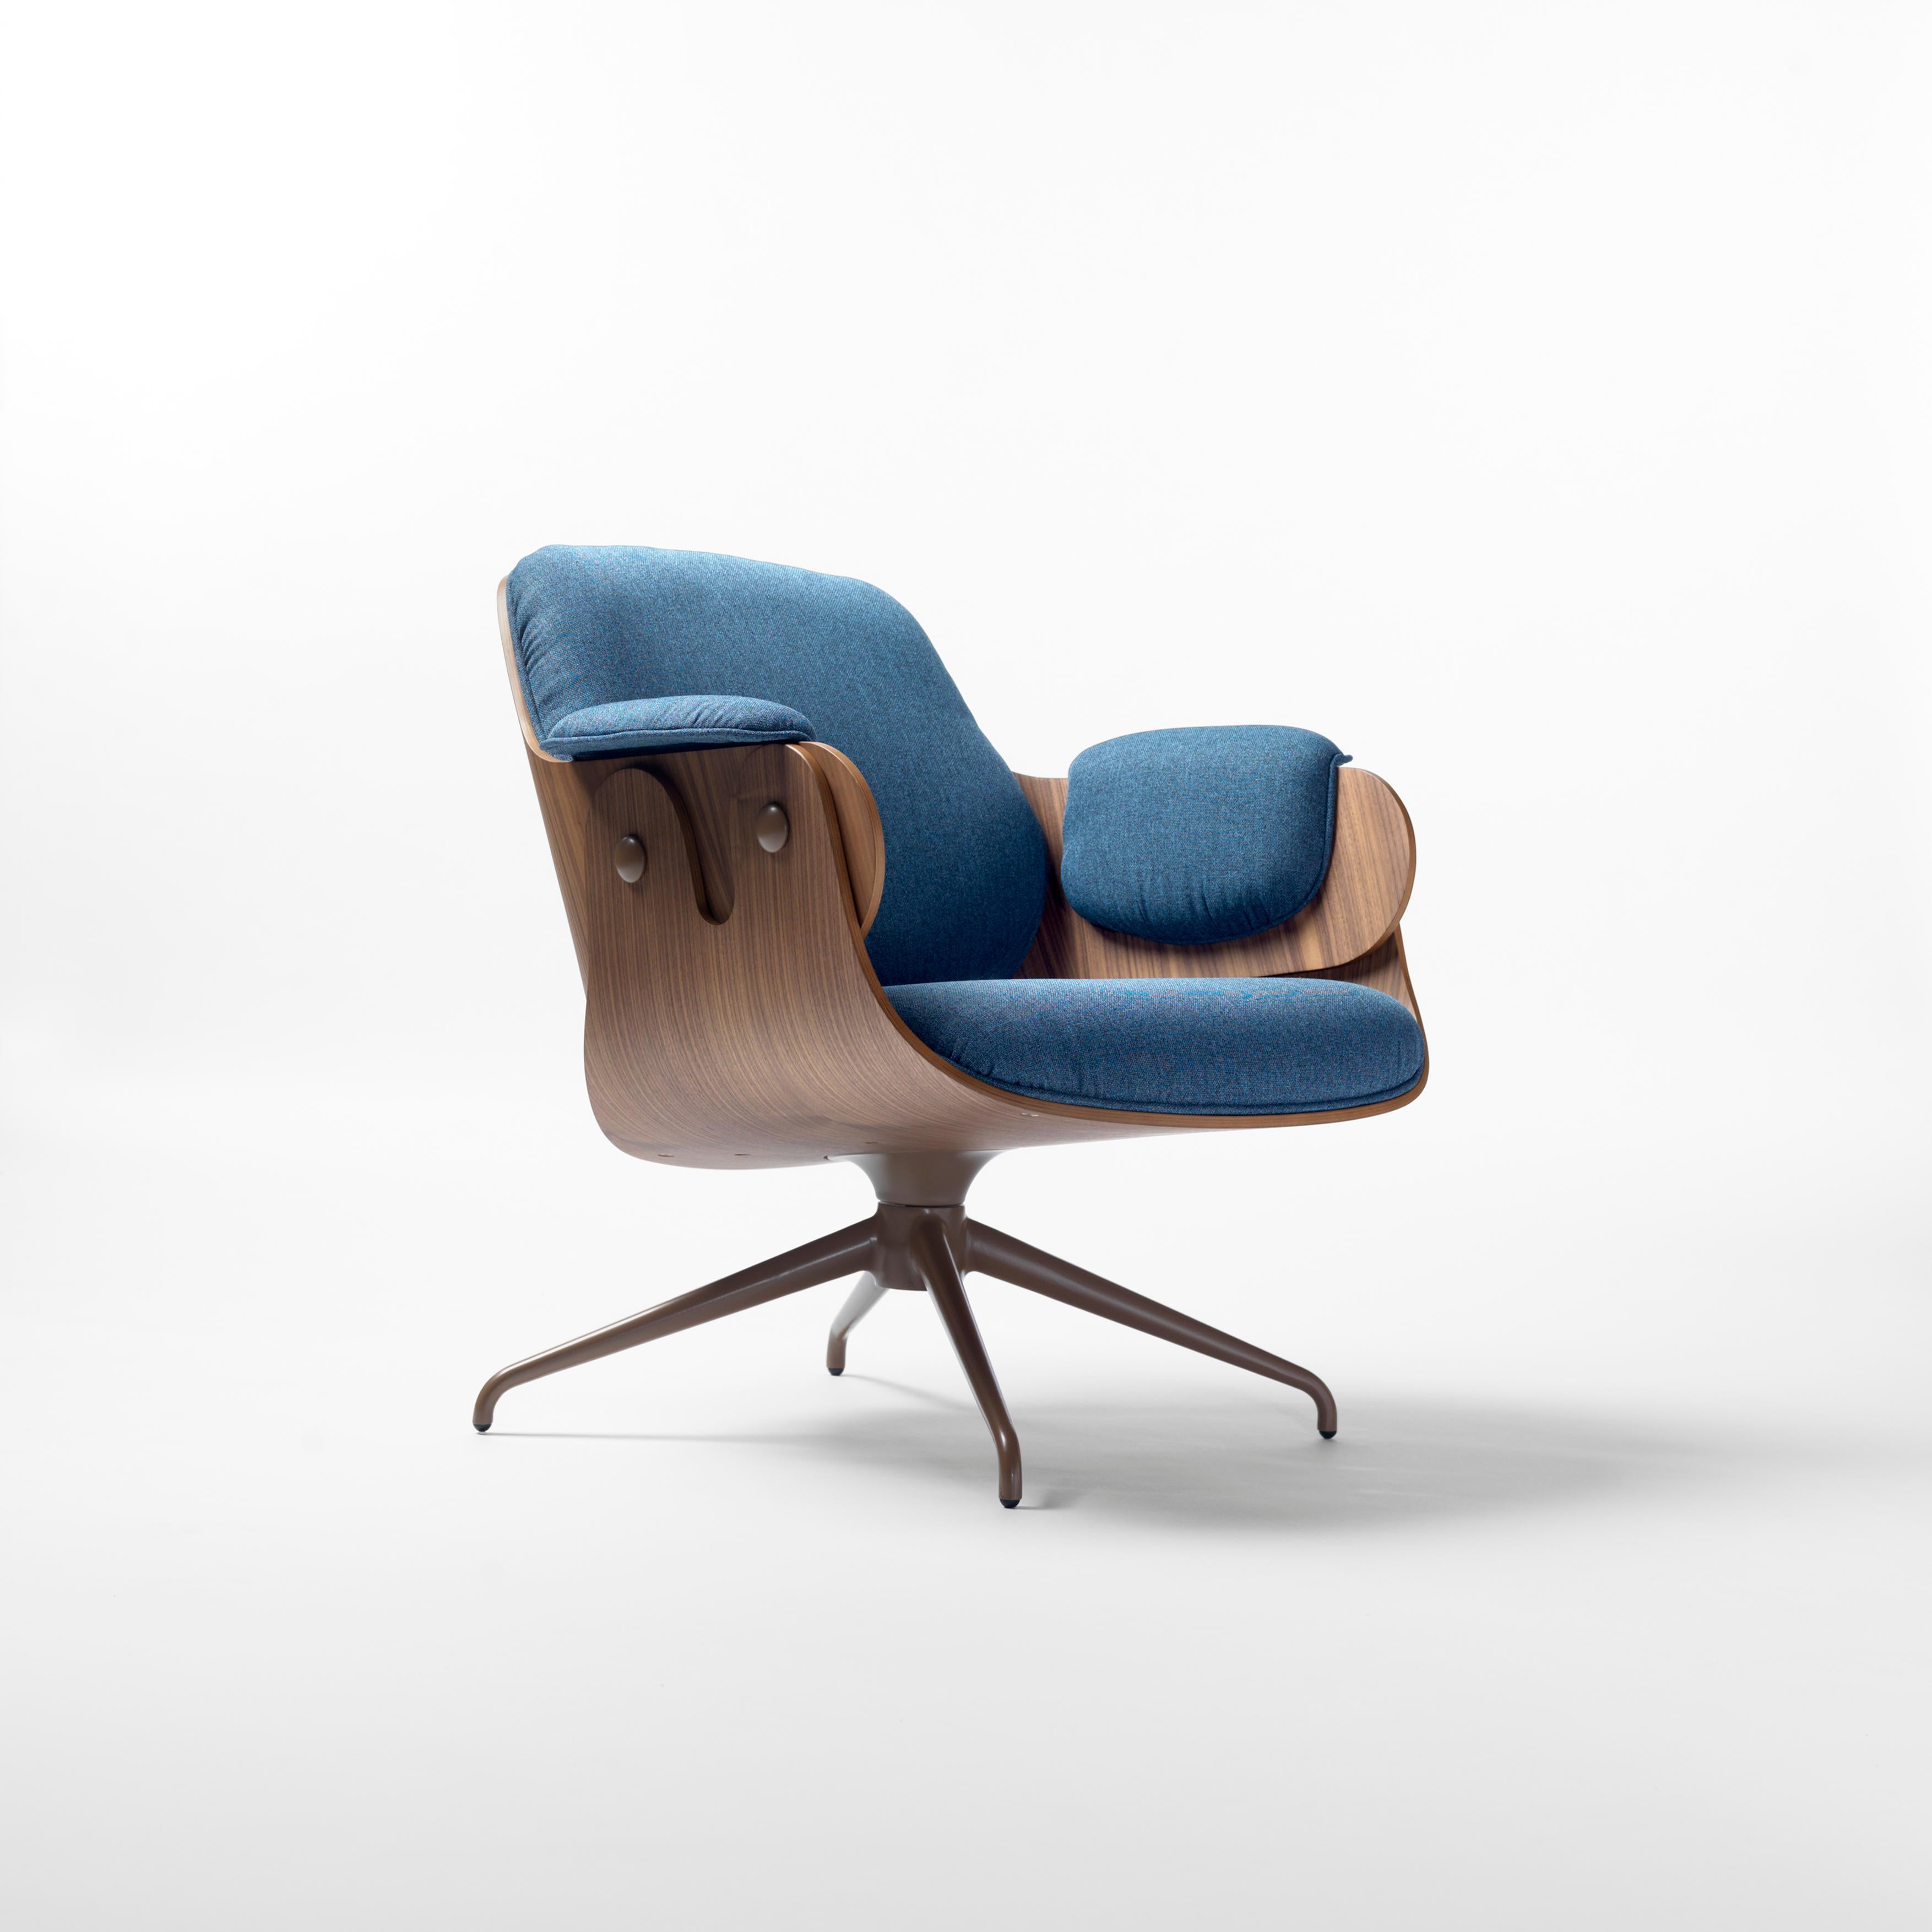 Jaime Hayon, Contemporary, Walnut, Blue Upholstery Low Lounger Armchair In New Condition For Sale In Barcelona, Barcelona